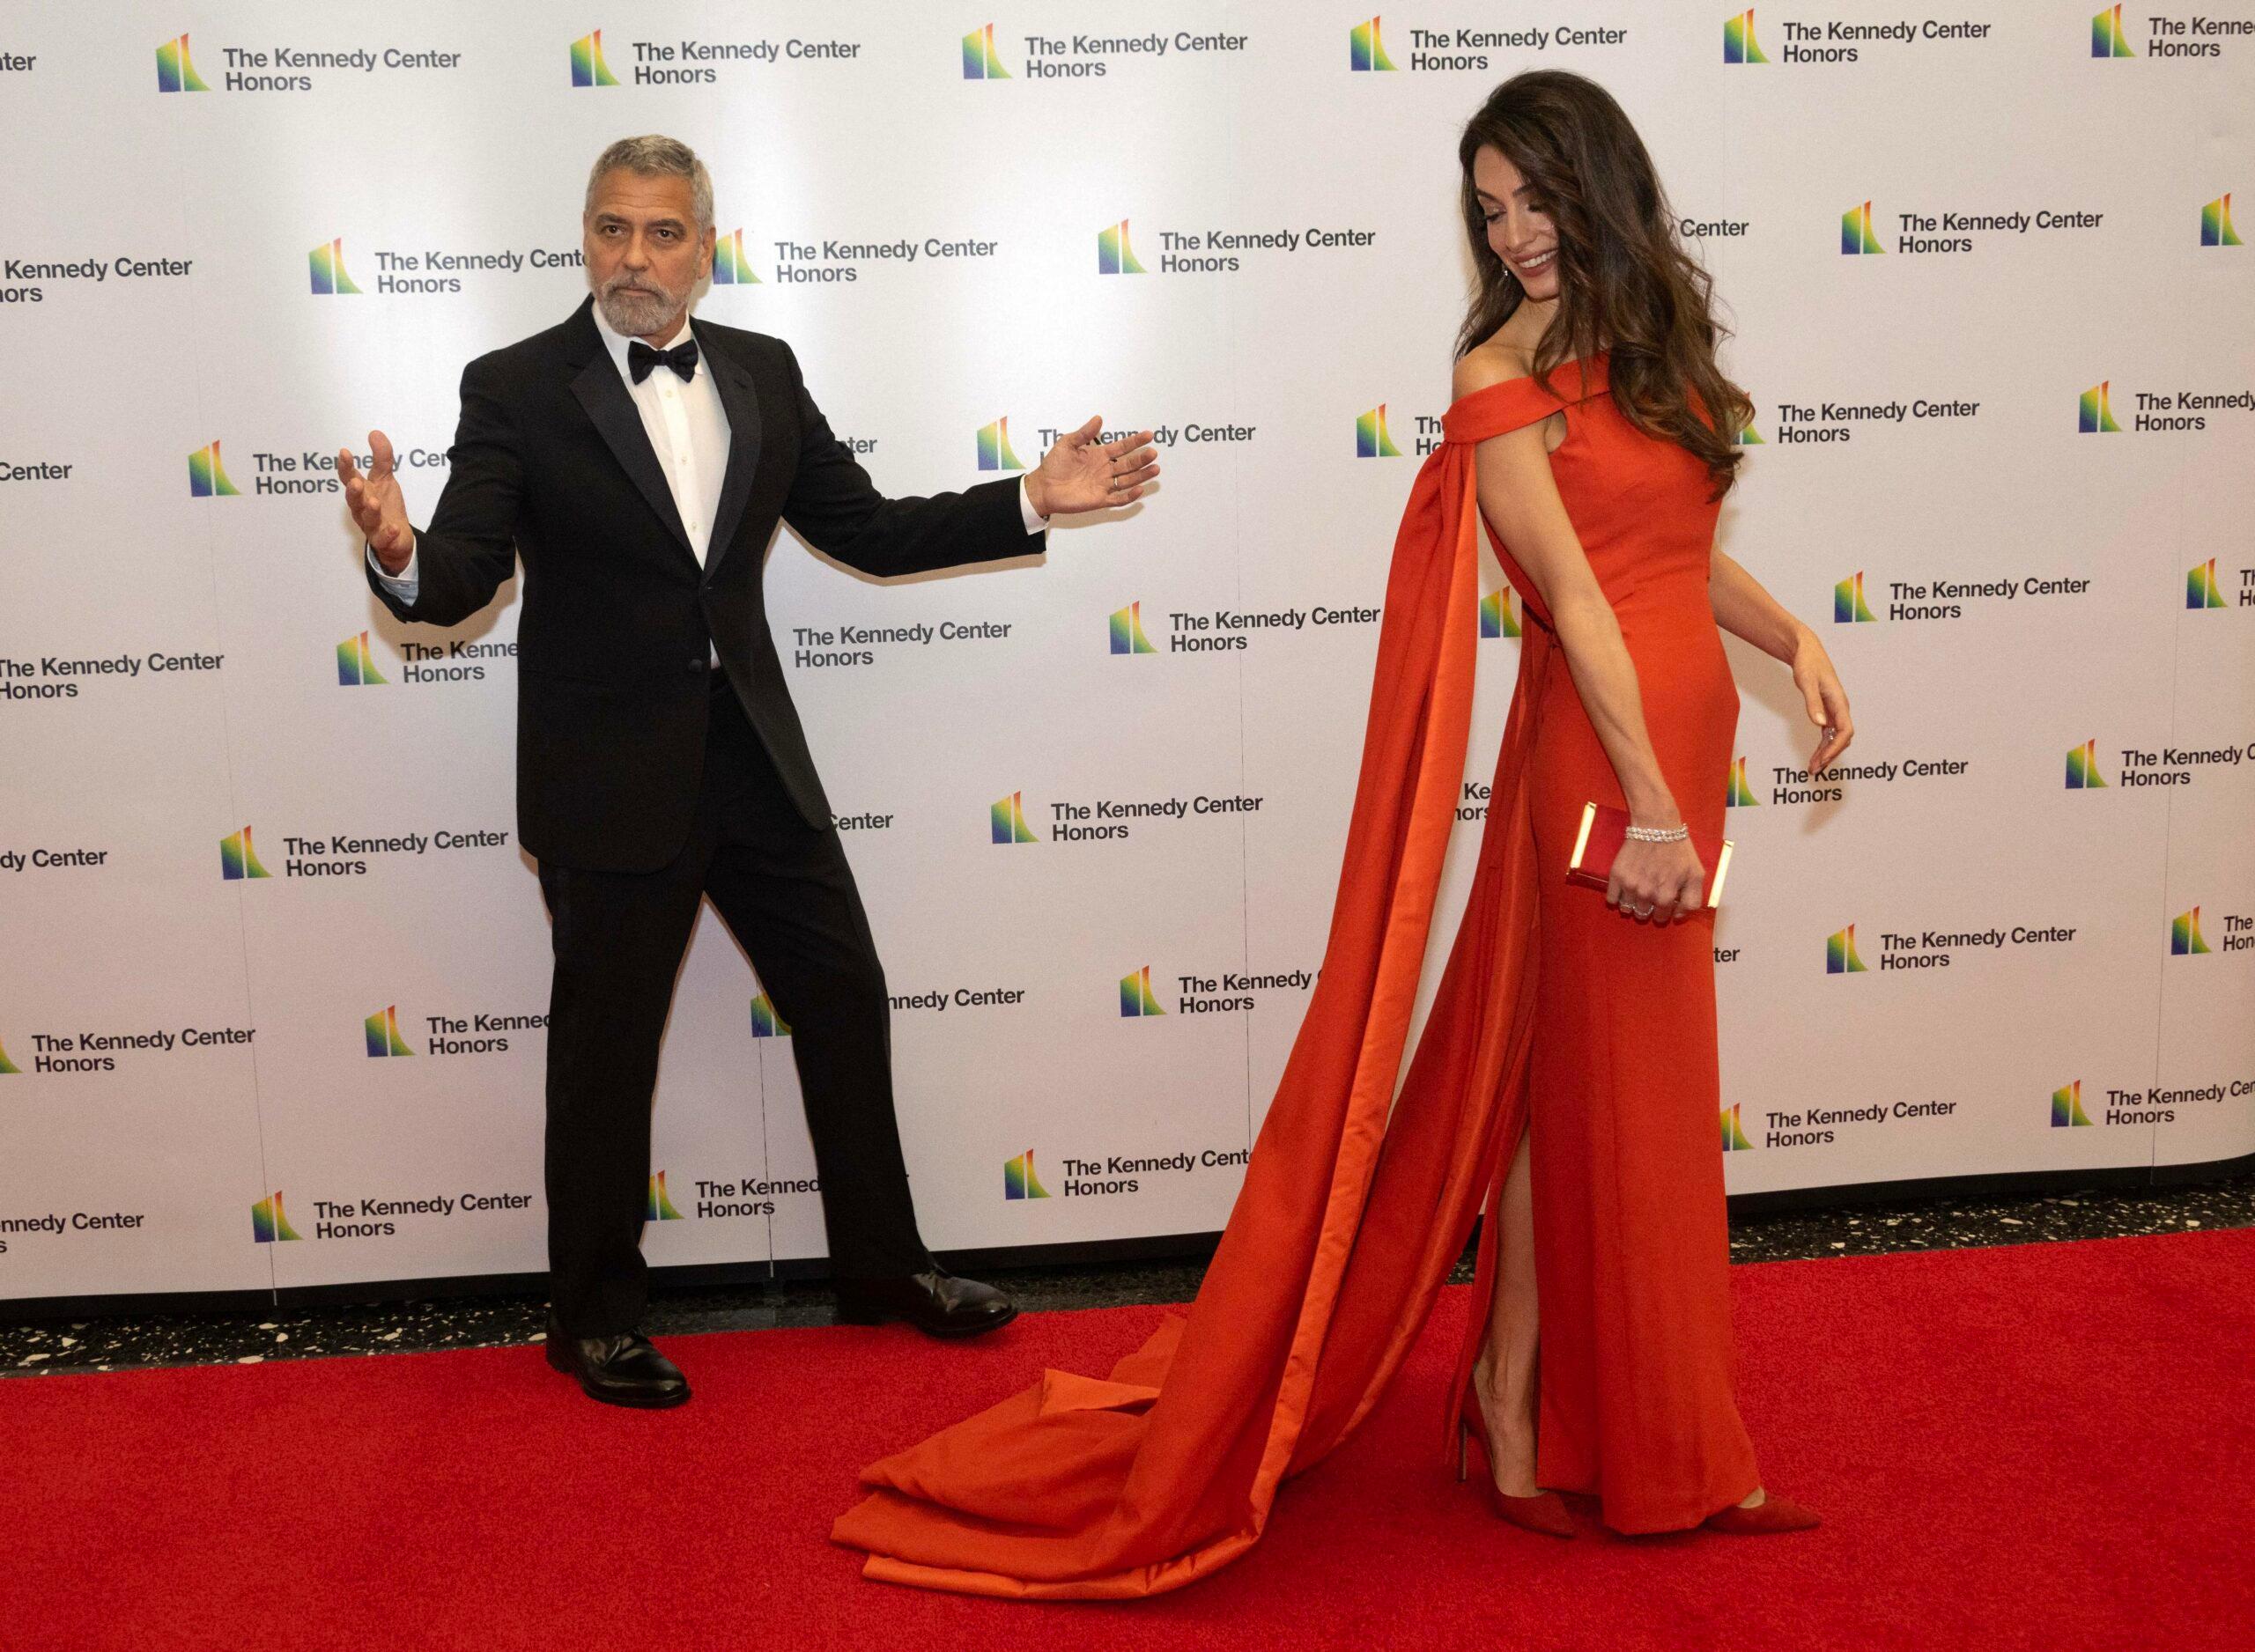 George Clooney won hearts at the 45th Kennedy Center Honors fixing Amal's train